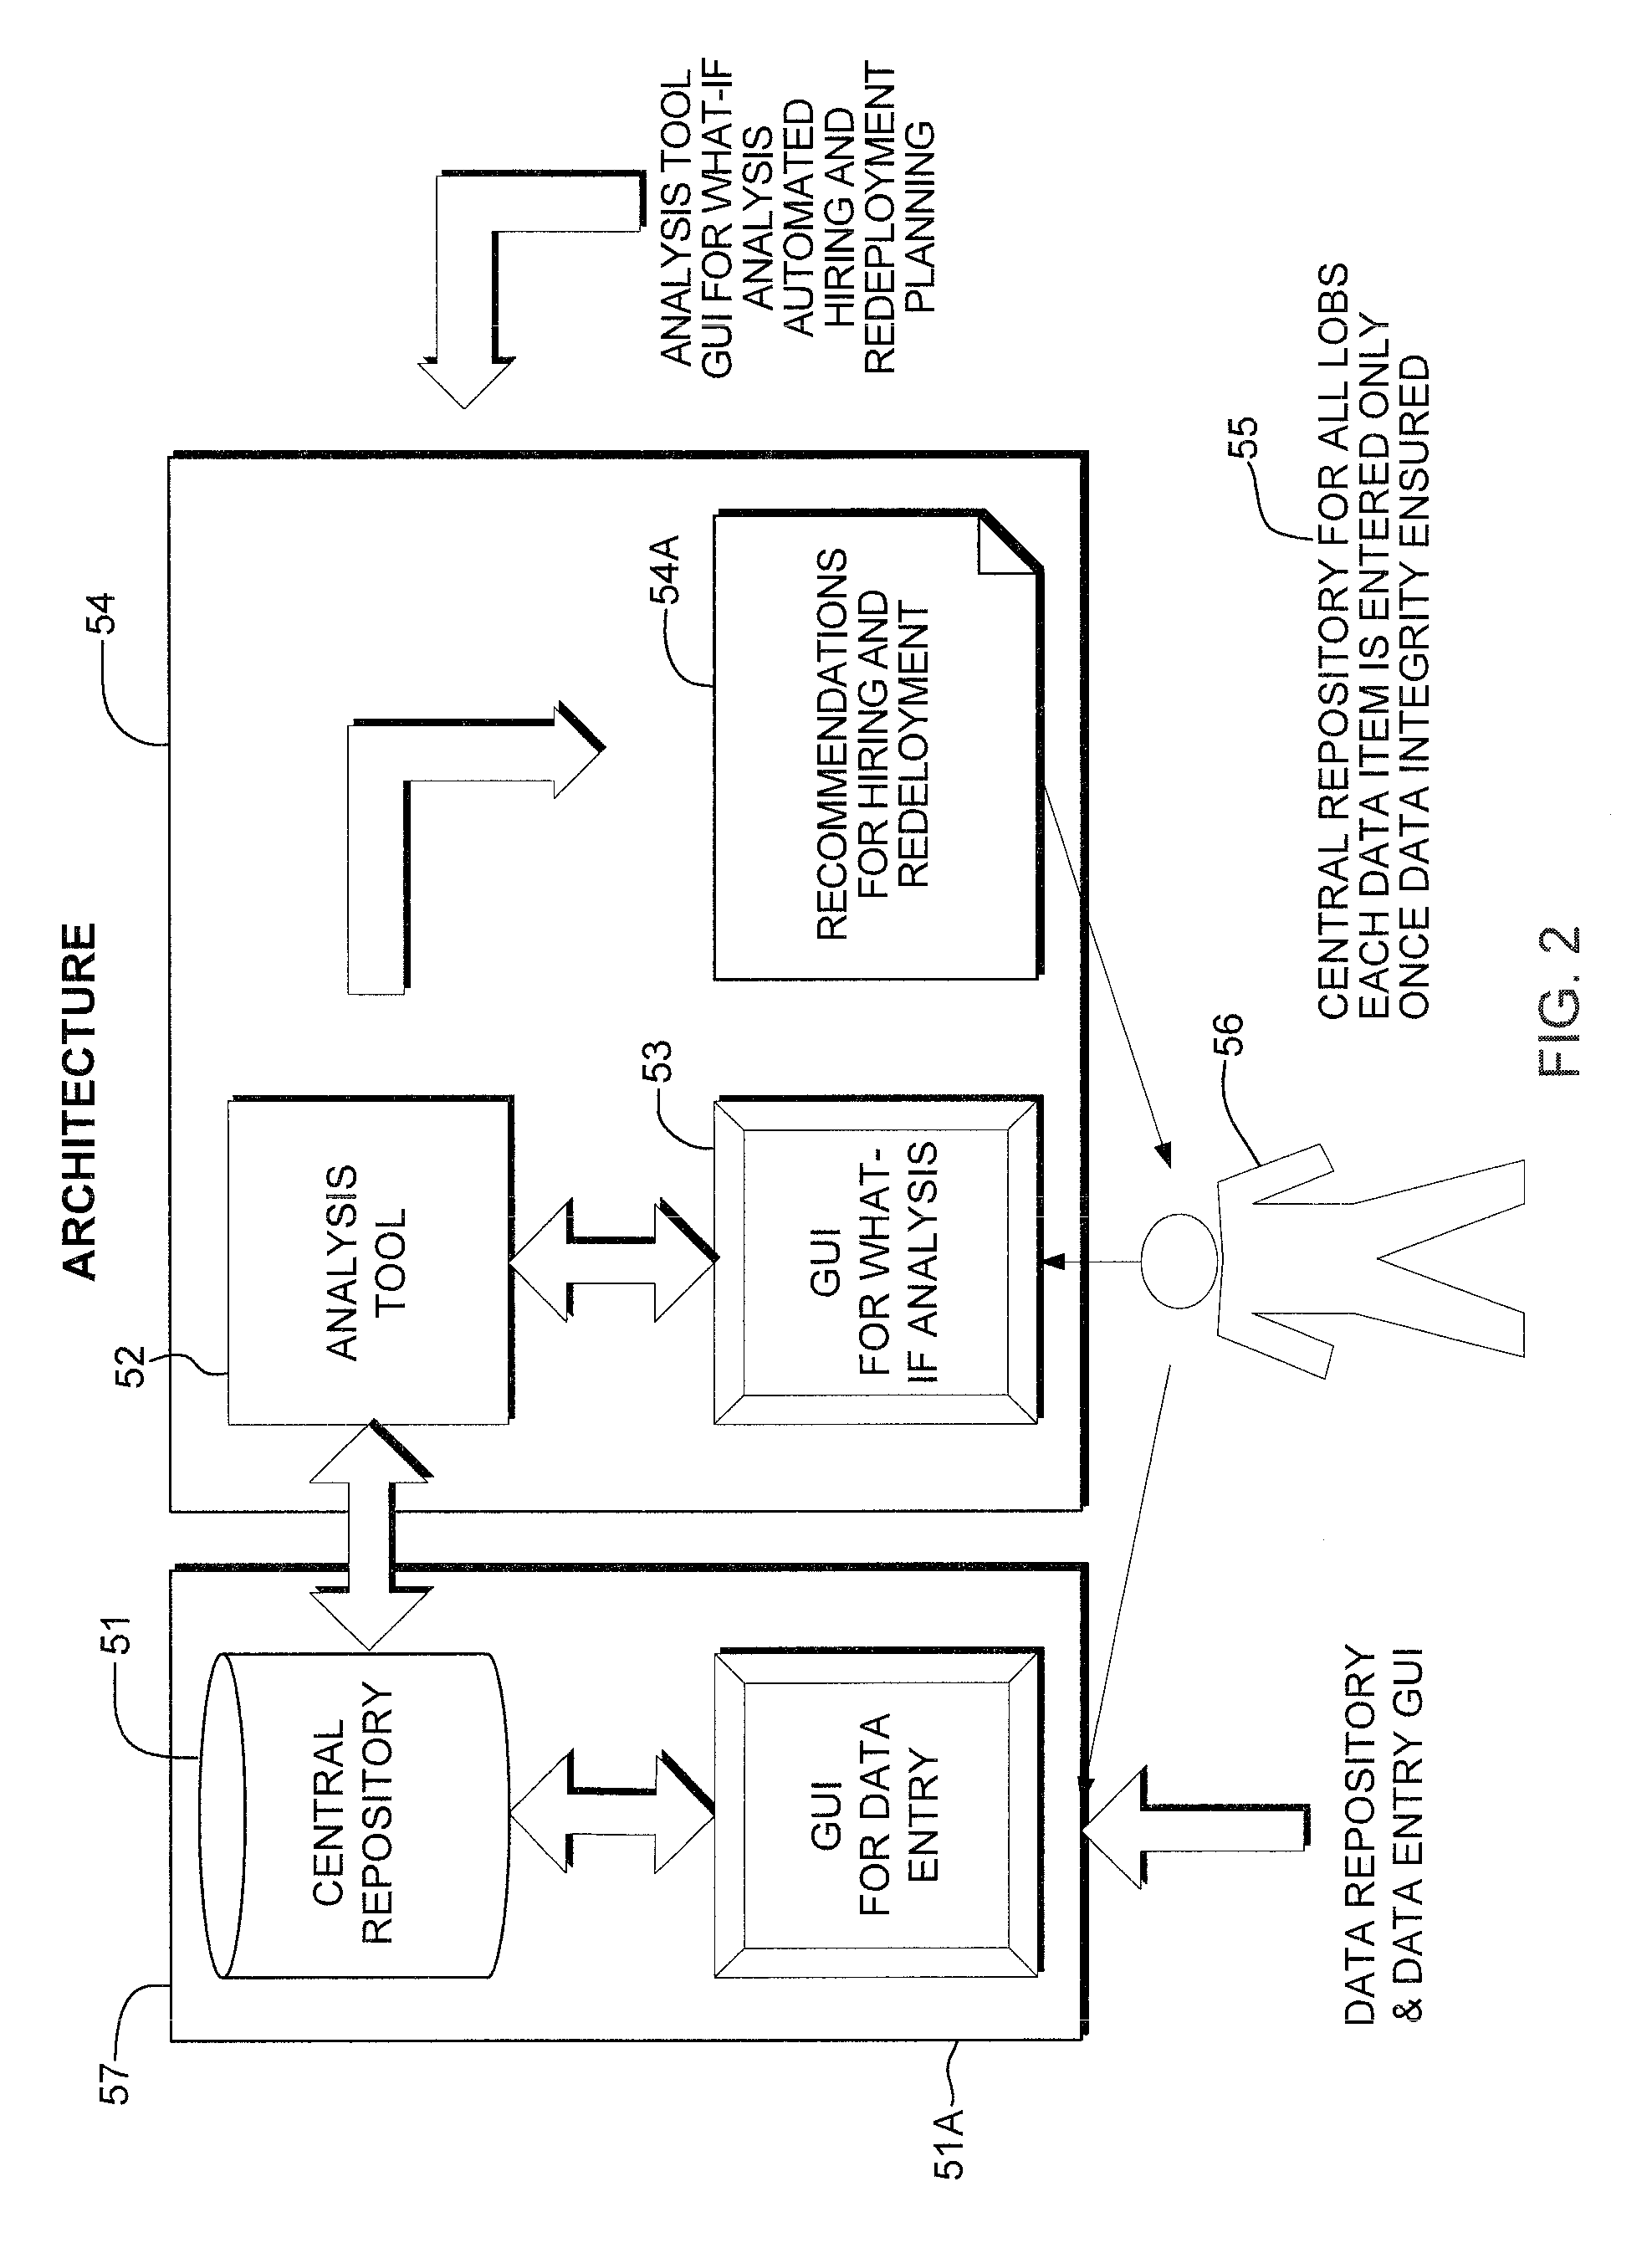 Method and system for strategic headcount planning with operational transition management of workforce